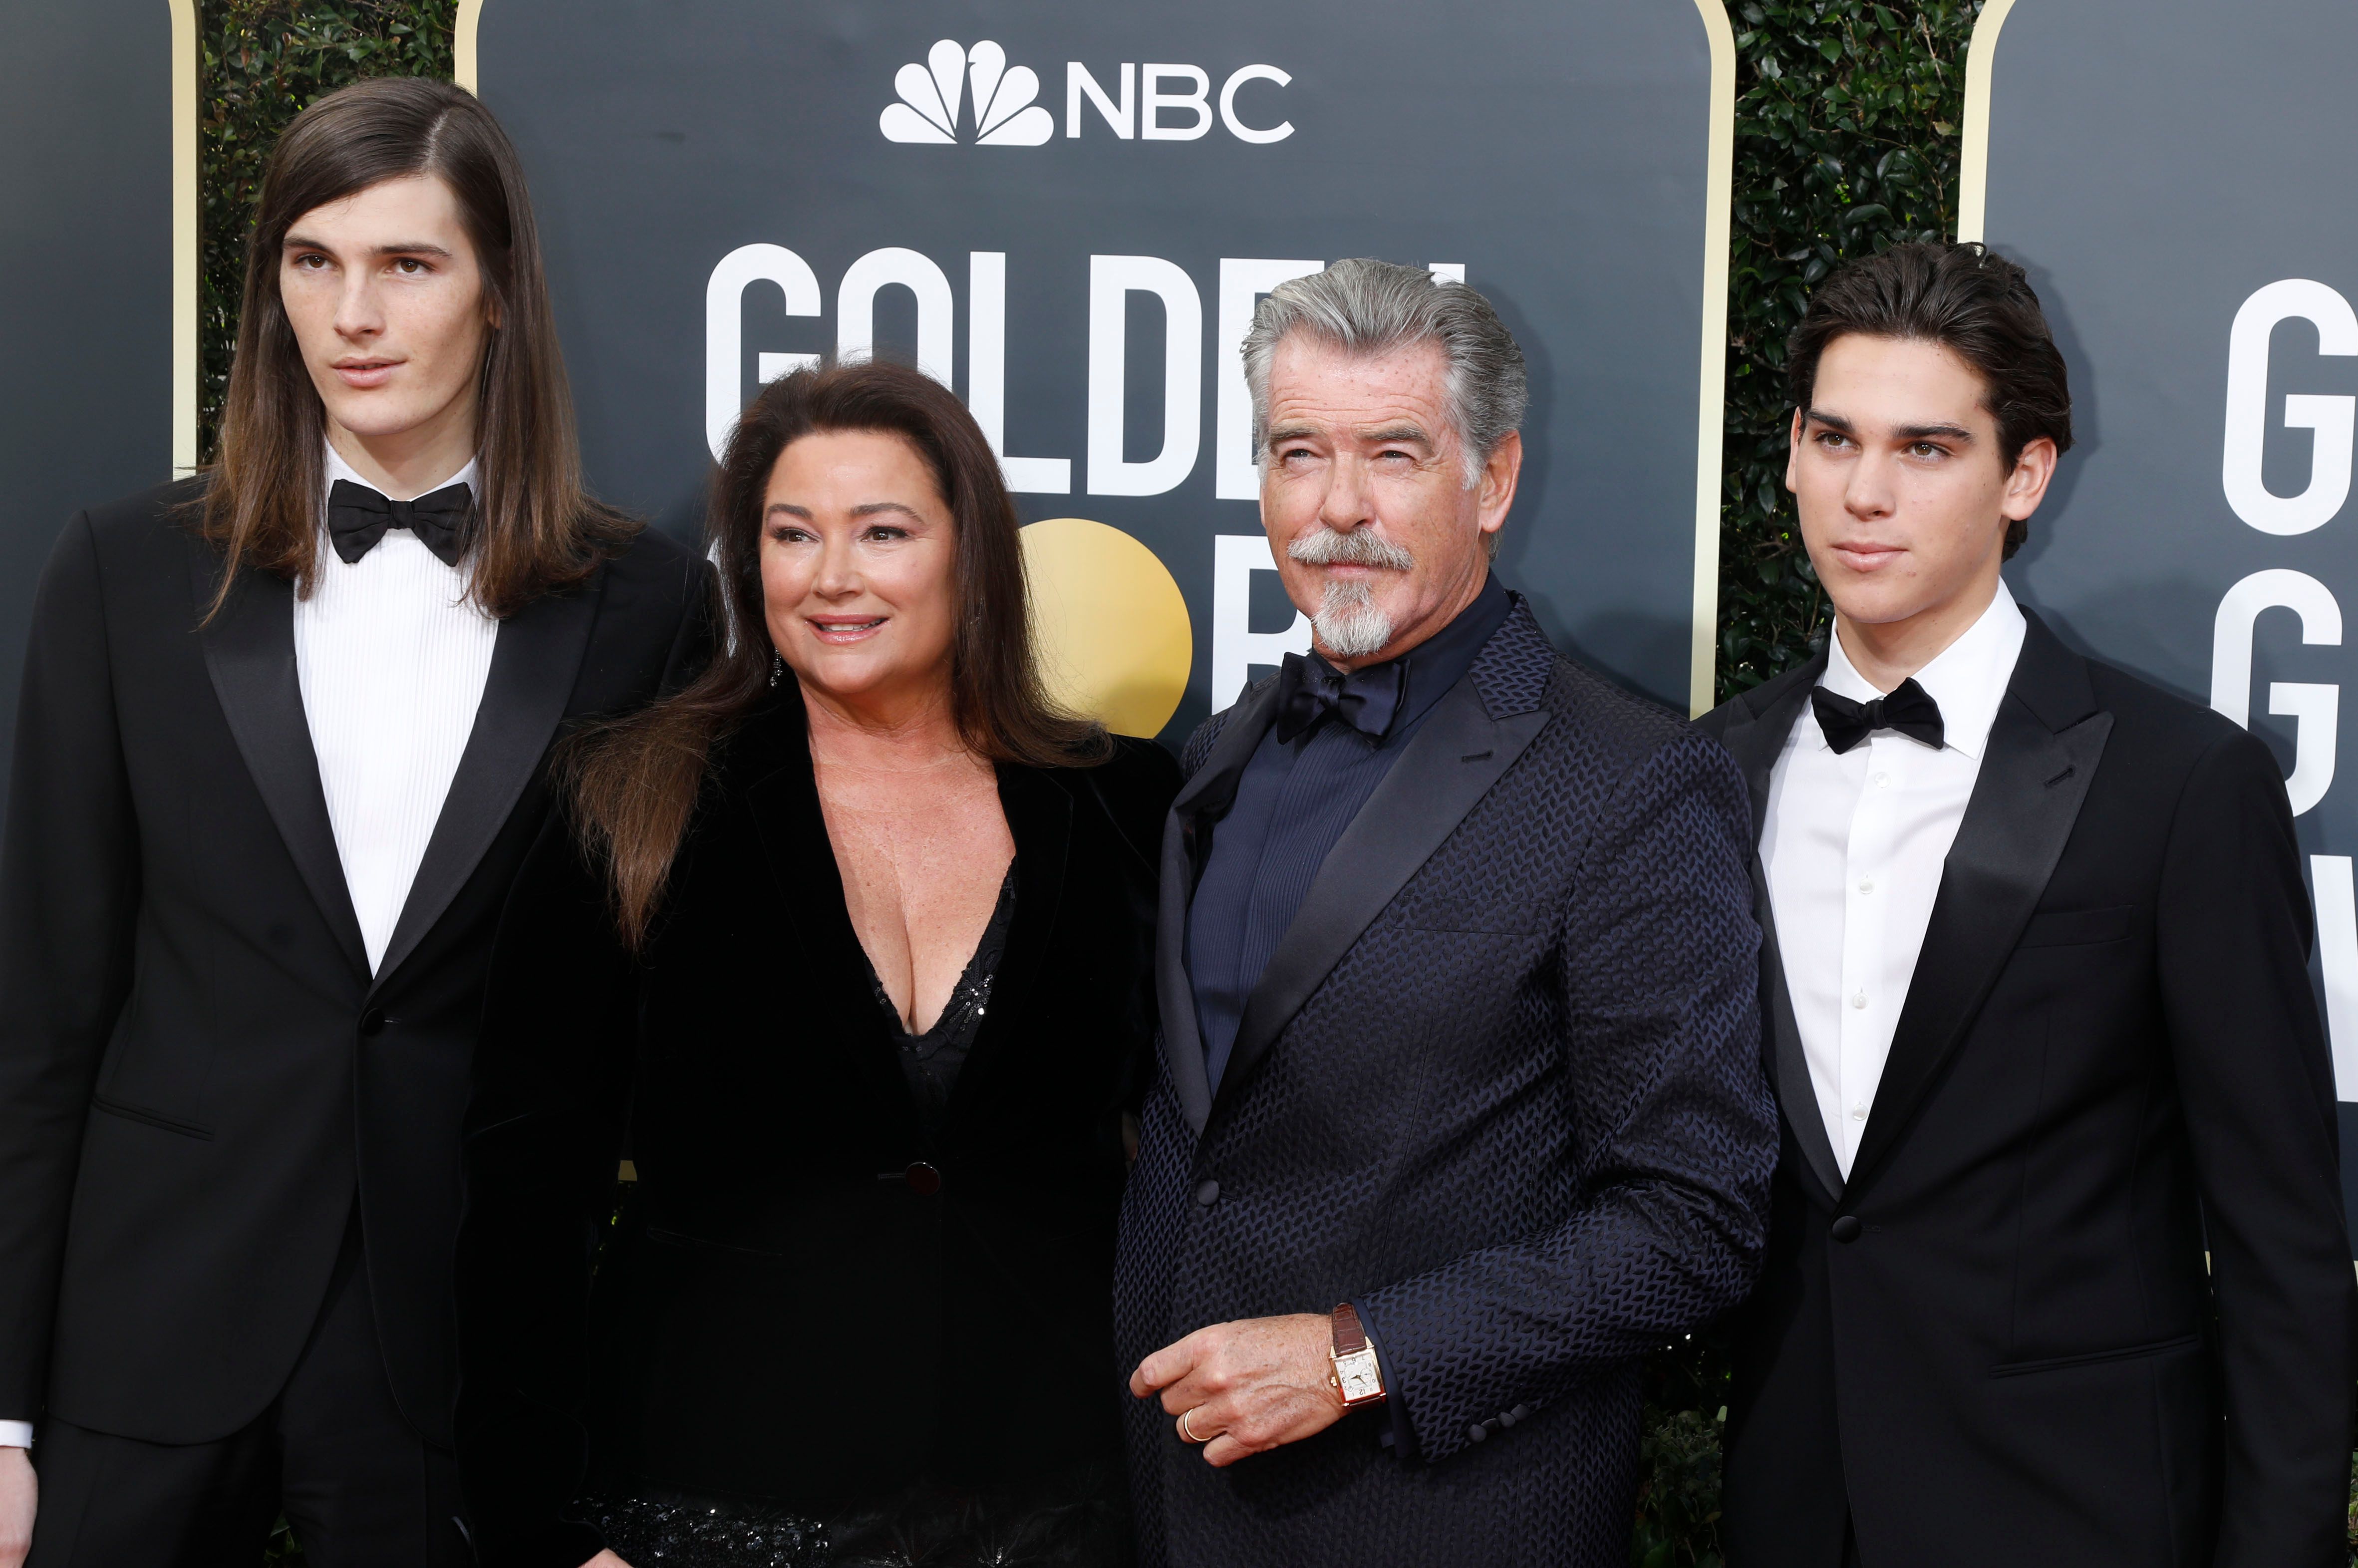 Dylan Brosnan, Keely Shaye Smith, Pierce Brosnan and Paris Brosnan photographed on the red carpet of the 77th Annual Golden Globe Awards at The Beverly Hilton Hotel on January 05, 2020 in Beverly Hills, California. | Source: Getty Images